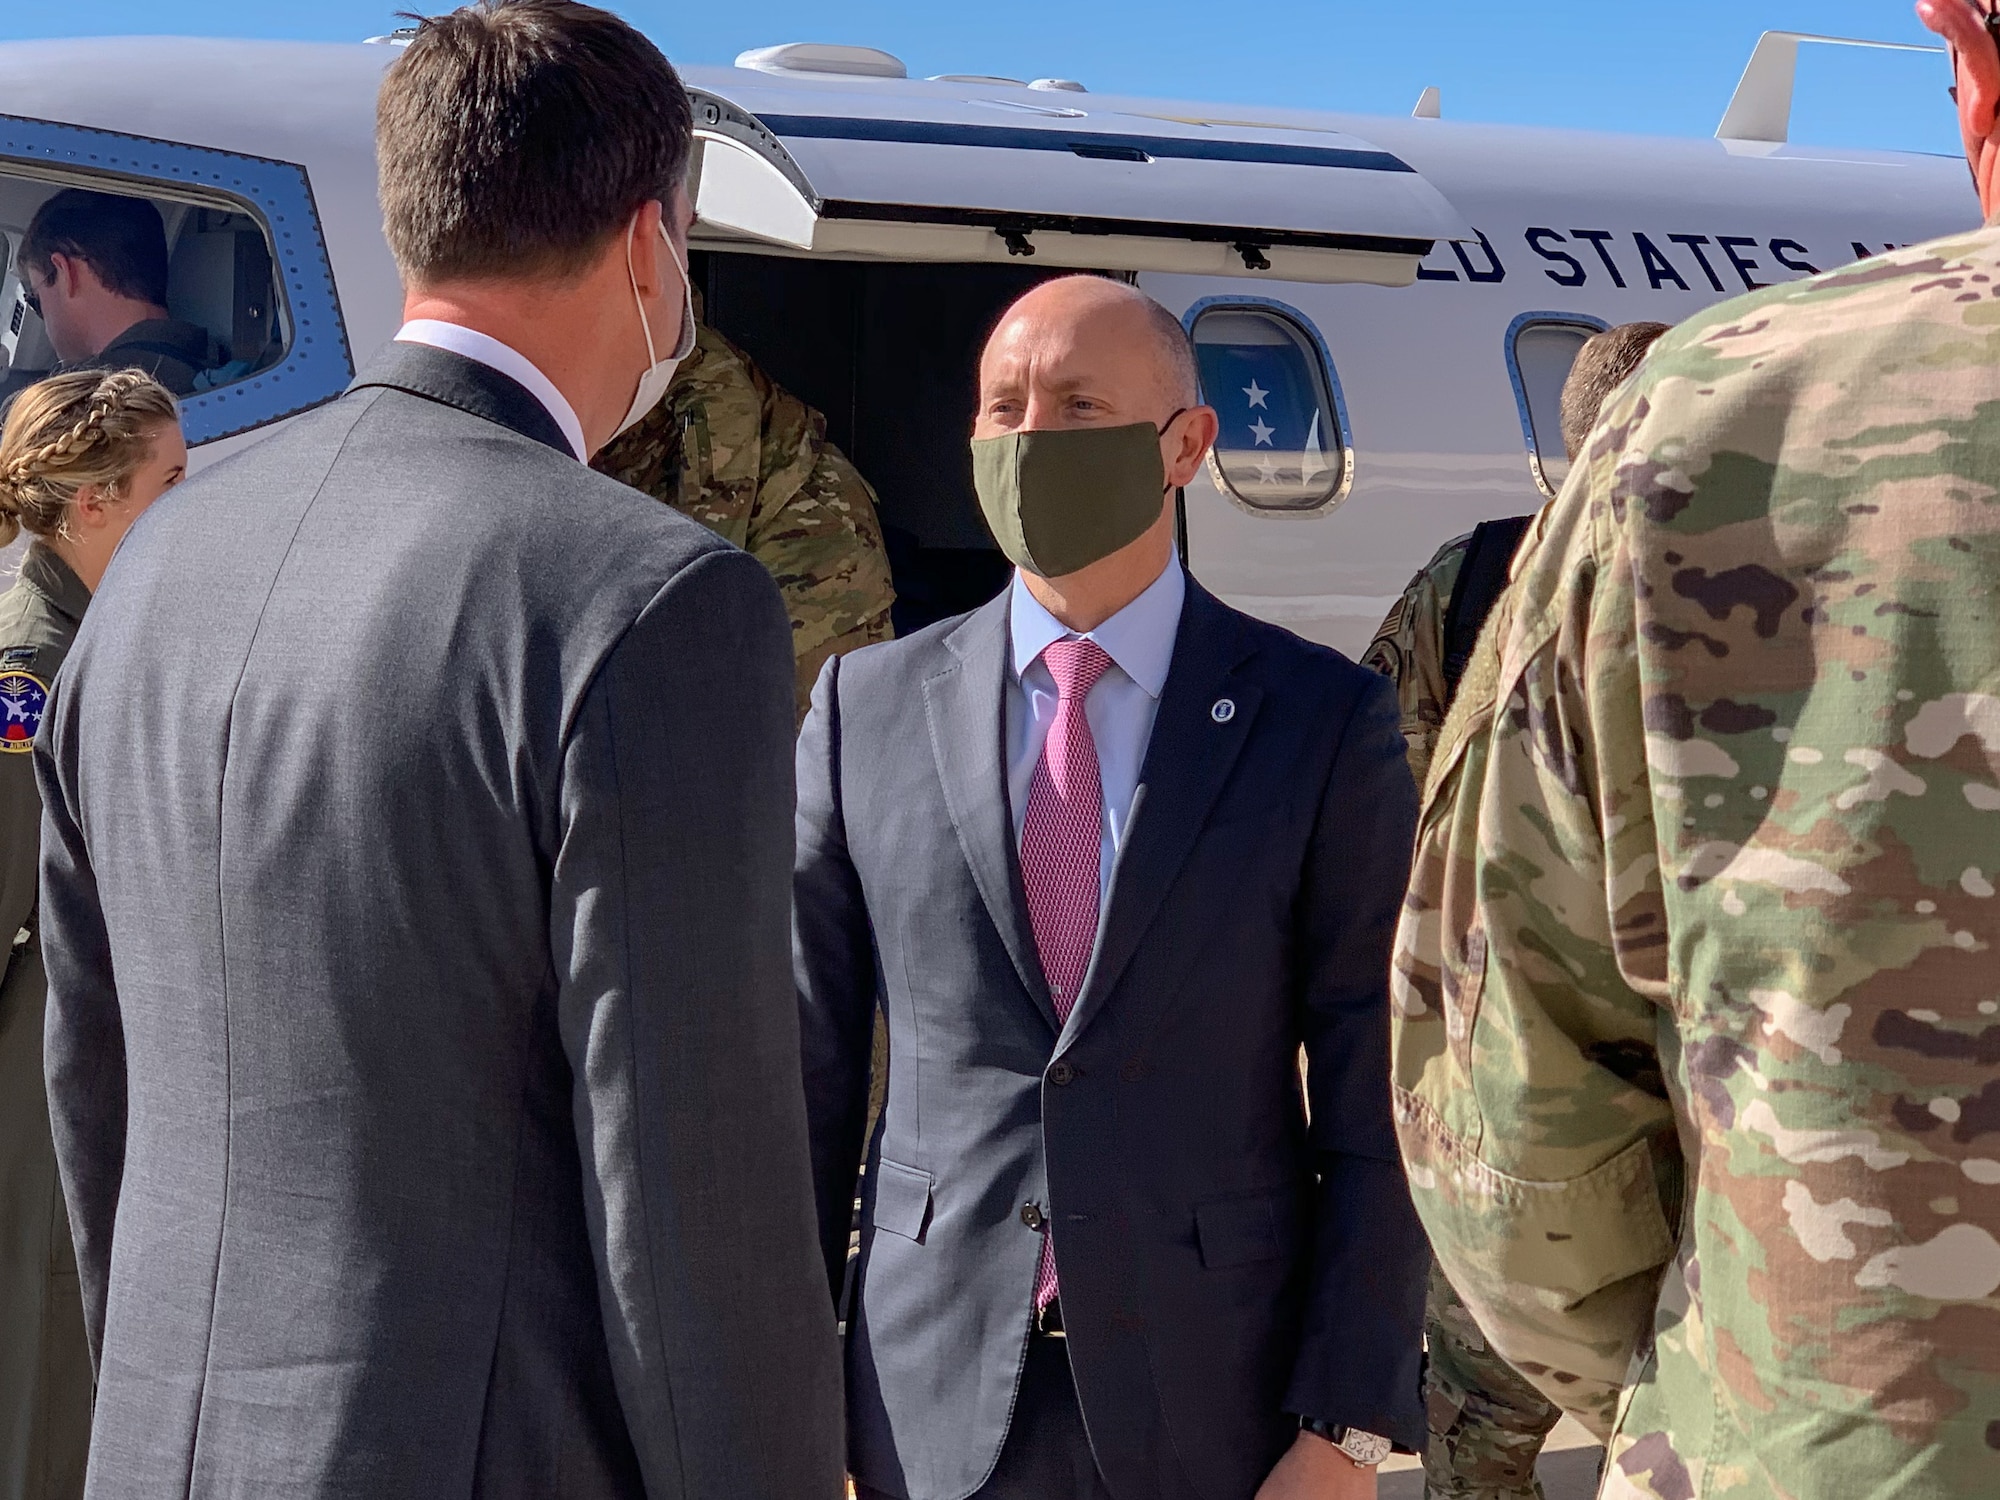 While performing the duties of Under Secretary of the Air Force Shon Manasco  is greeted by Oklahoma Gov. Kevin Stitt as he arrives at Tinker Air Force Base, Oklahoma, April 29, 2020.  Manasco visited Tinker in order to learn more about how the base has adapted to the COVID-19 crisis.